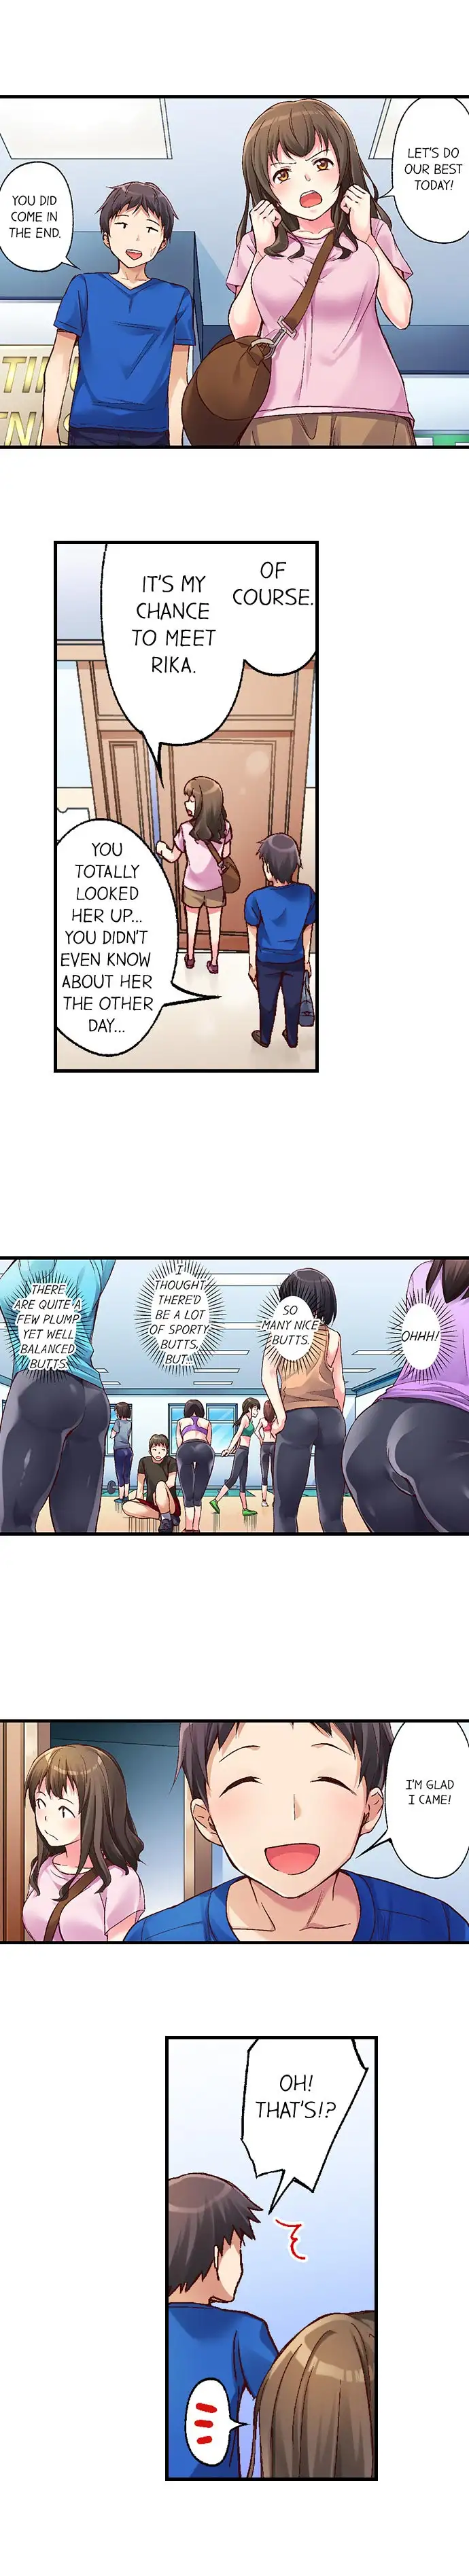 No Panty Booty Workout! - Chapter 1 Page 6